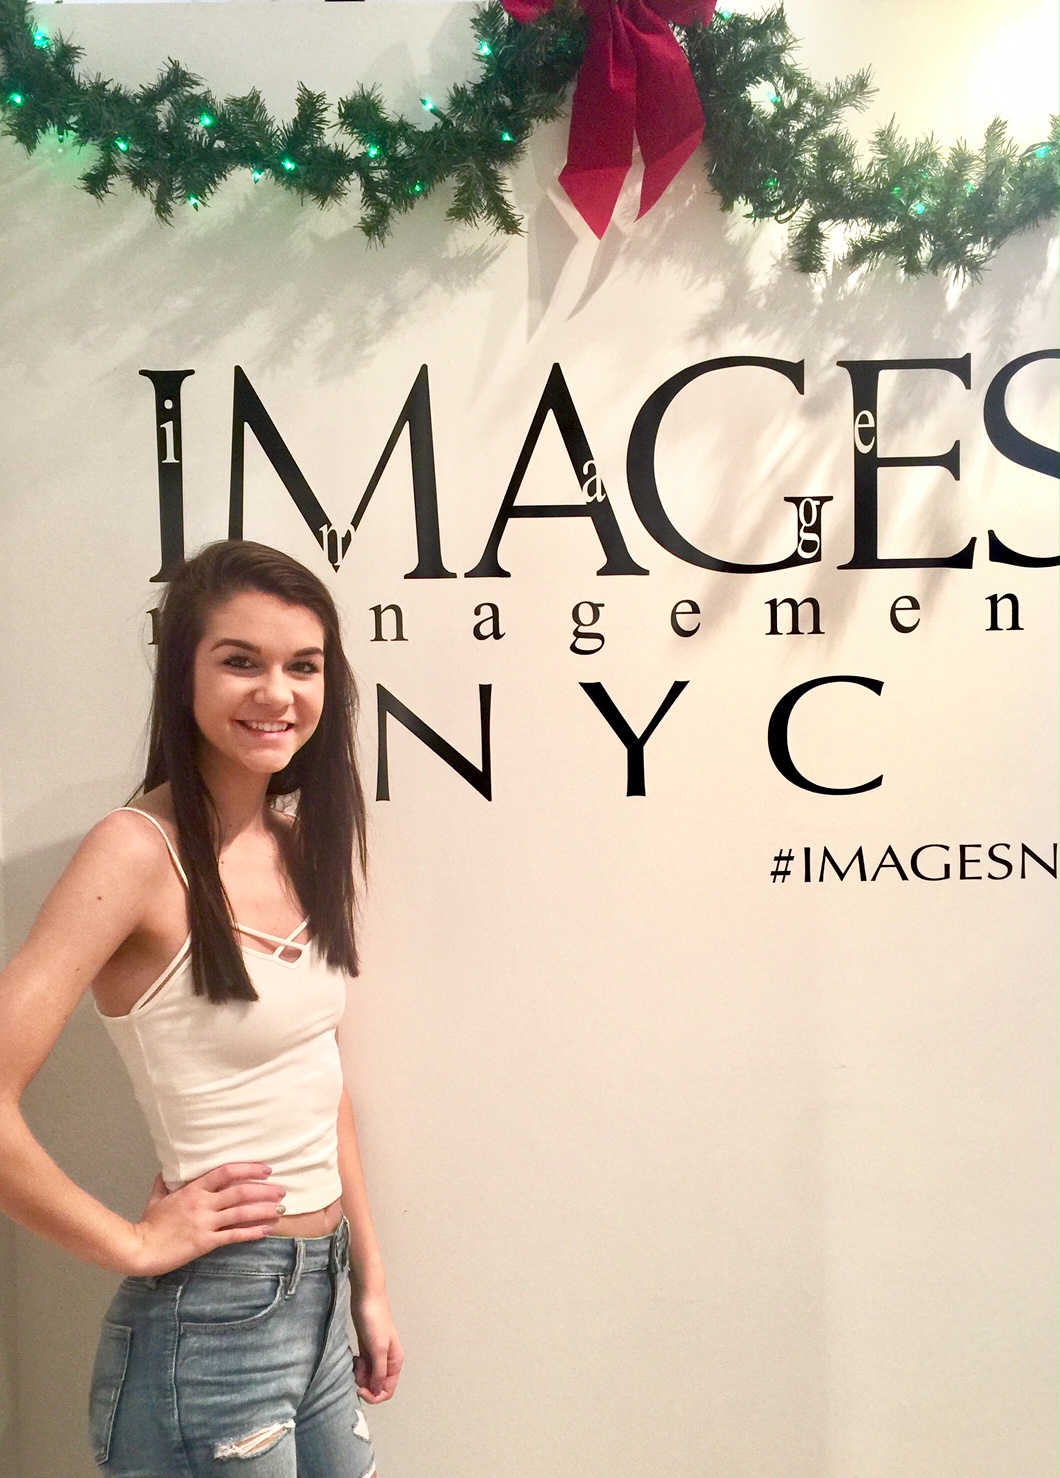 Emily Signed With Images Management